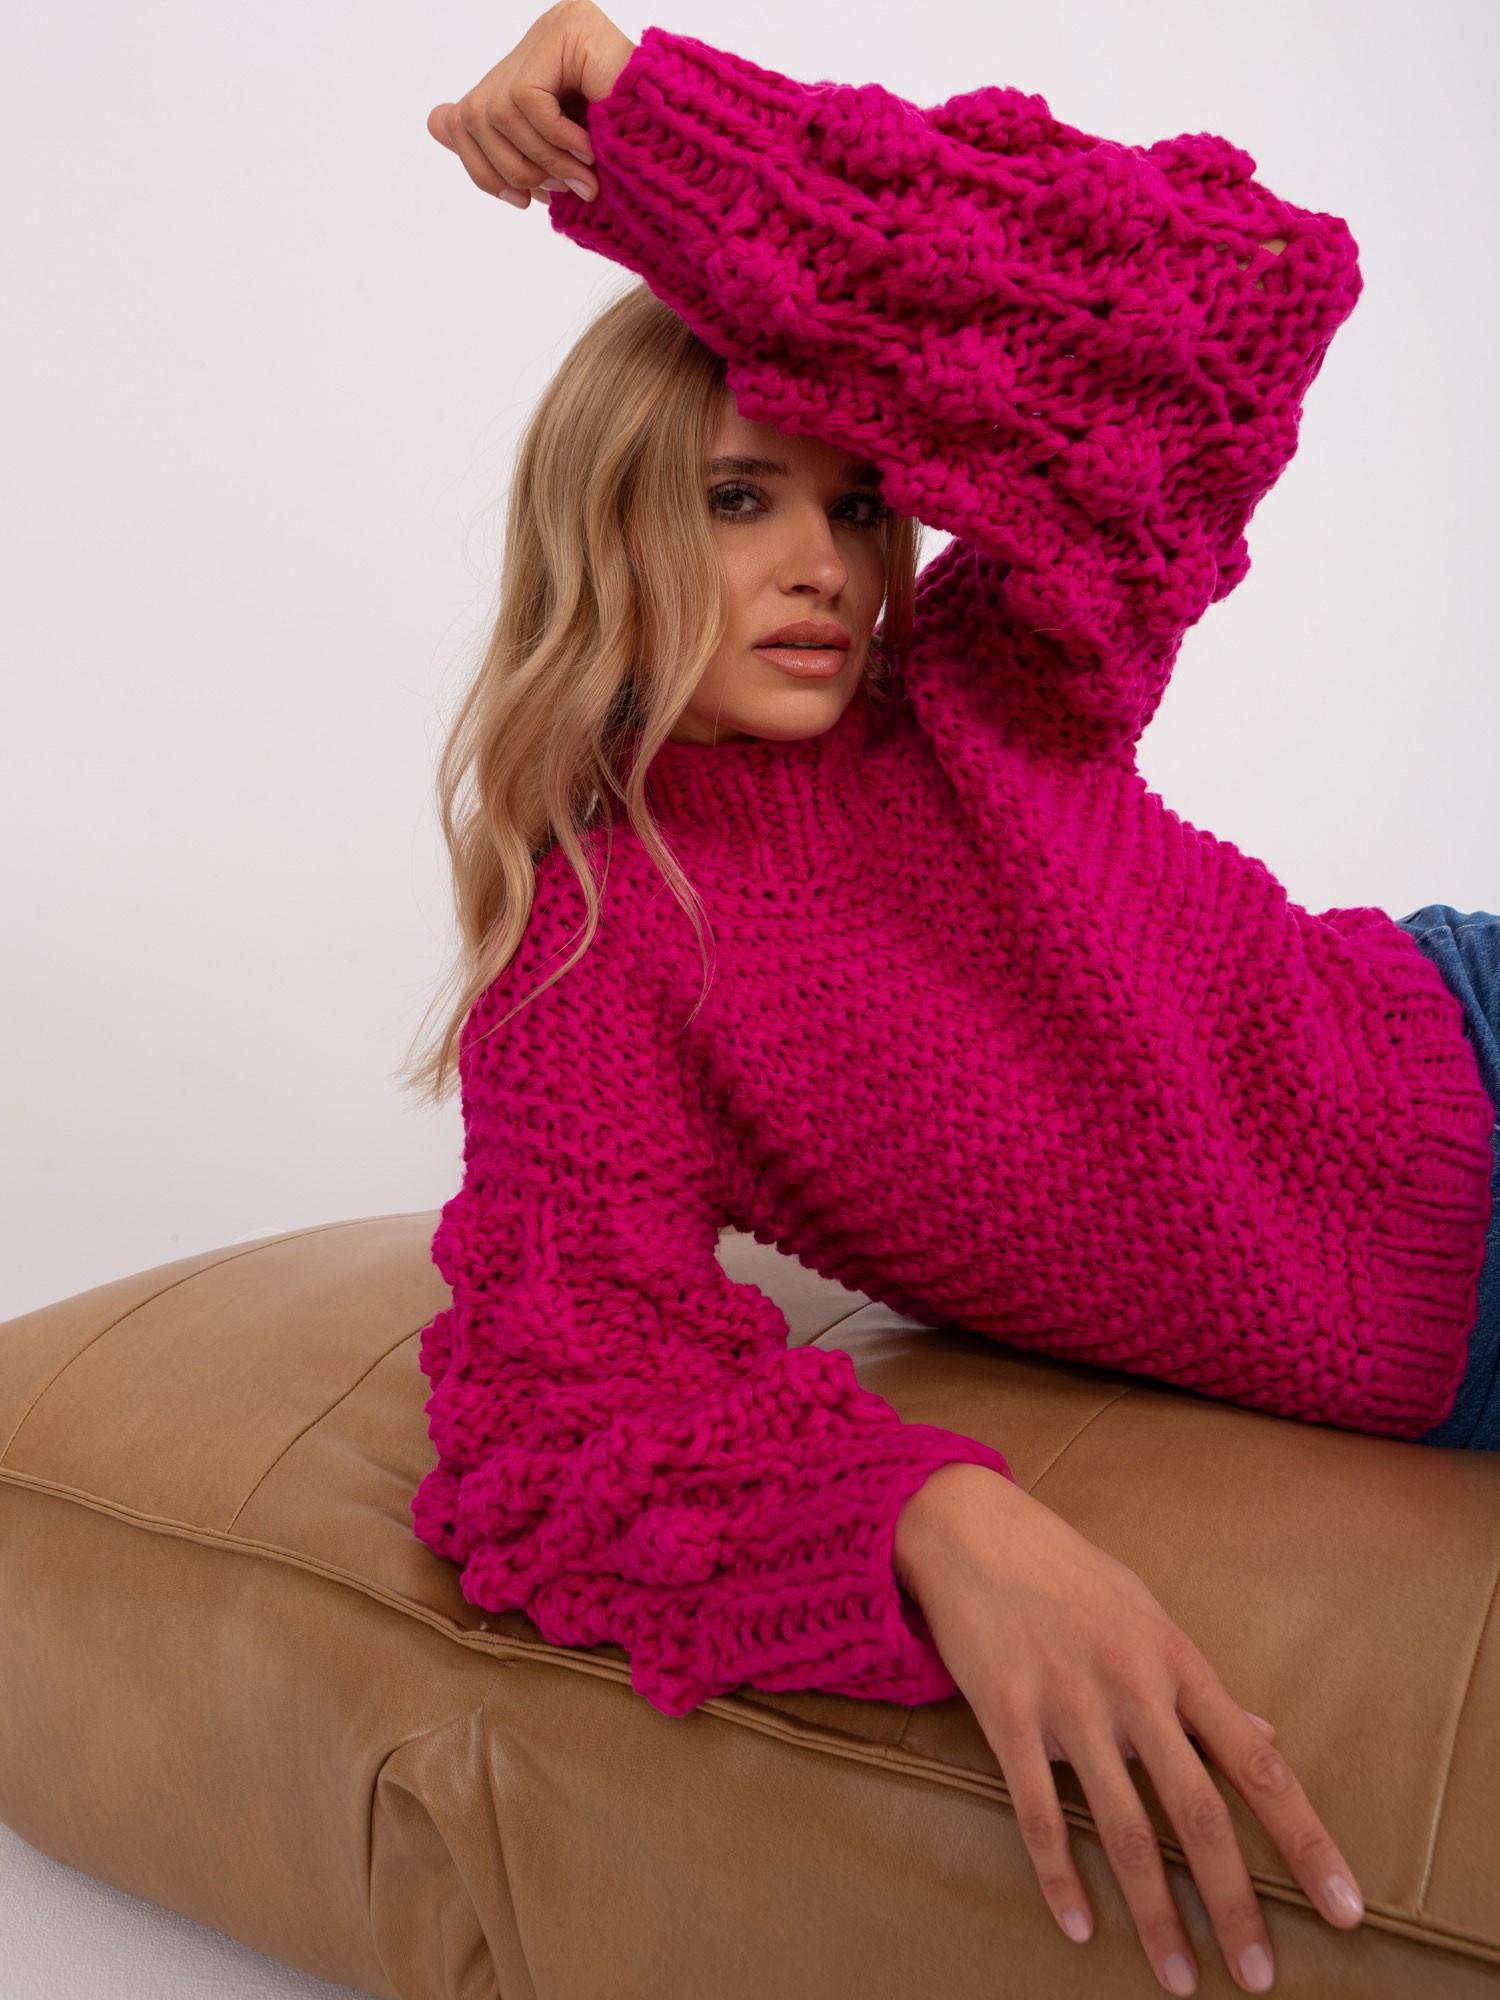 Fuchsia oversize sweater with puffed sleeves